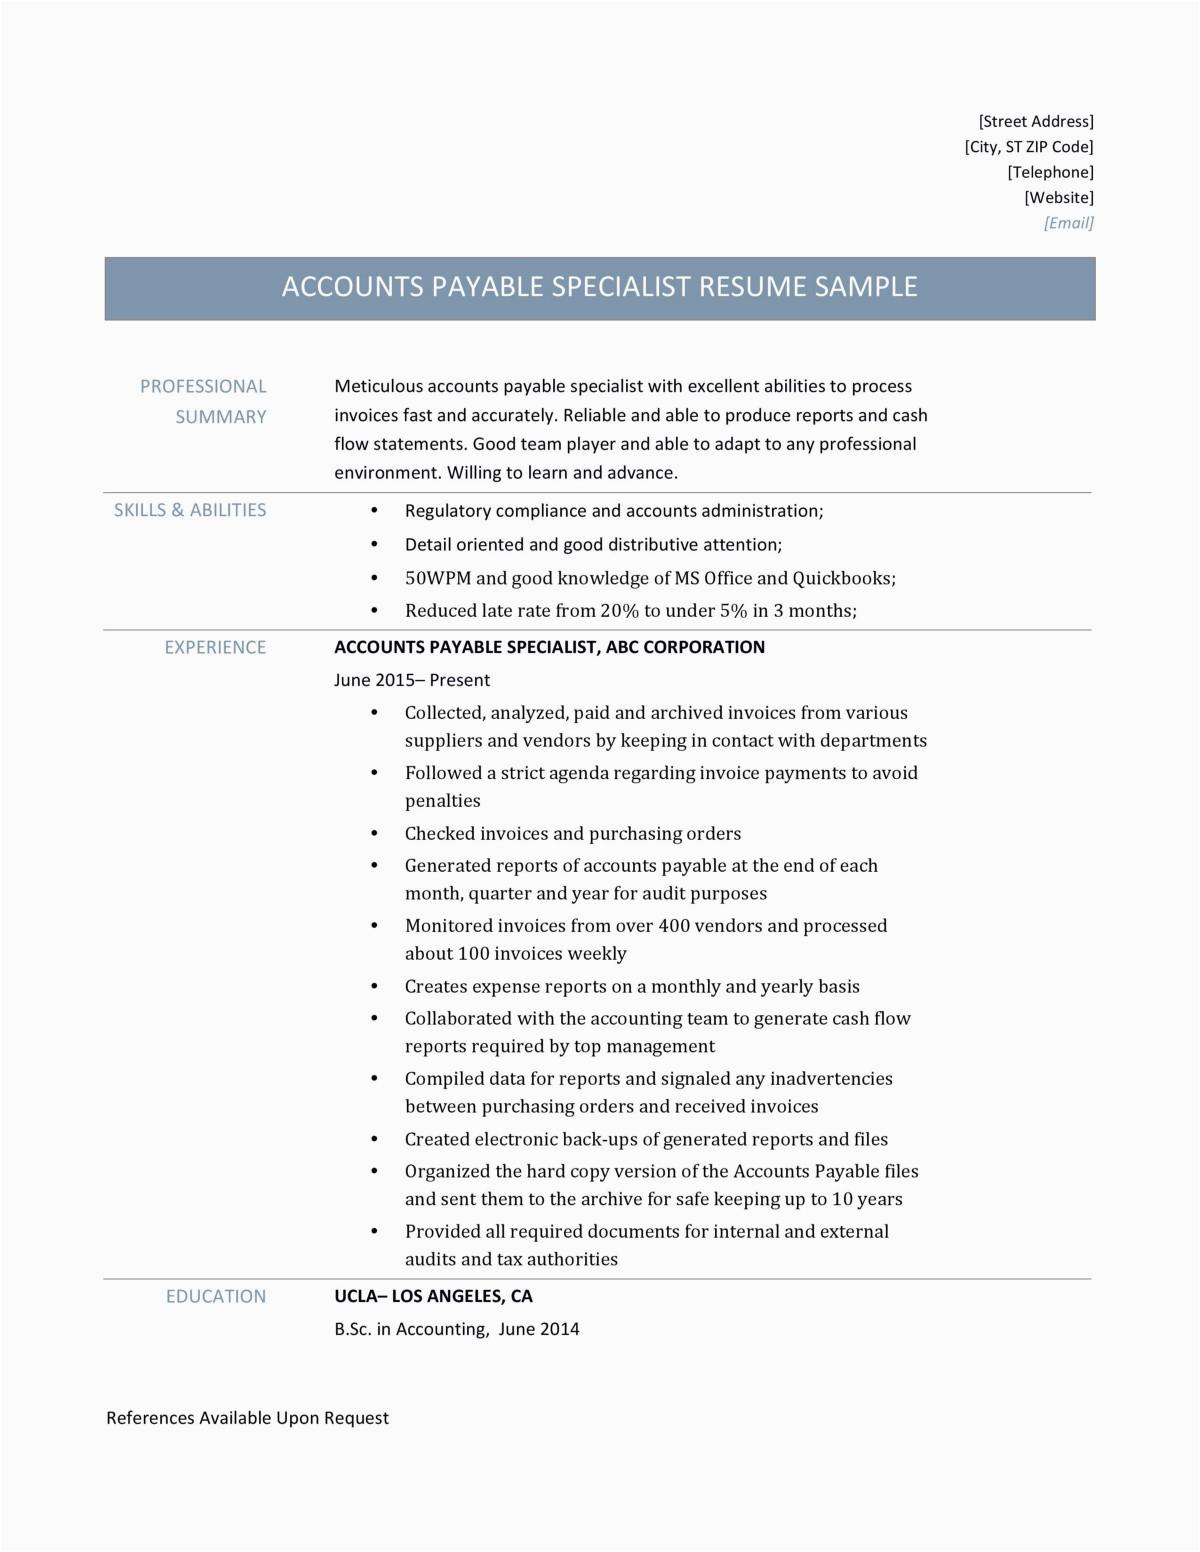 Sample Resume for Entry Level Accounts Payable Accounts Payable Specialist Resume Samples Line Resume Builders